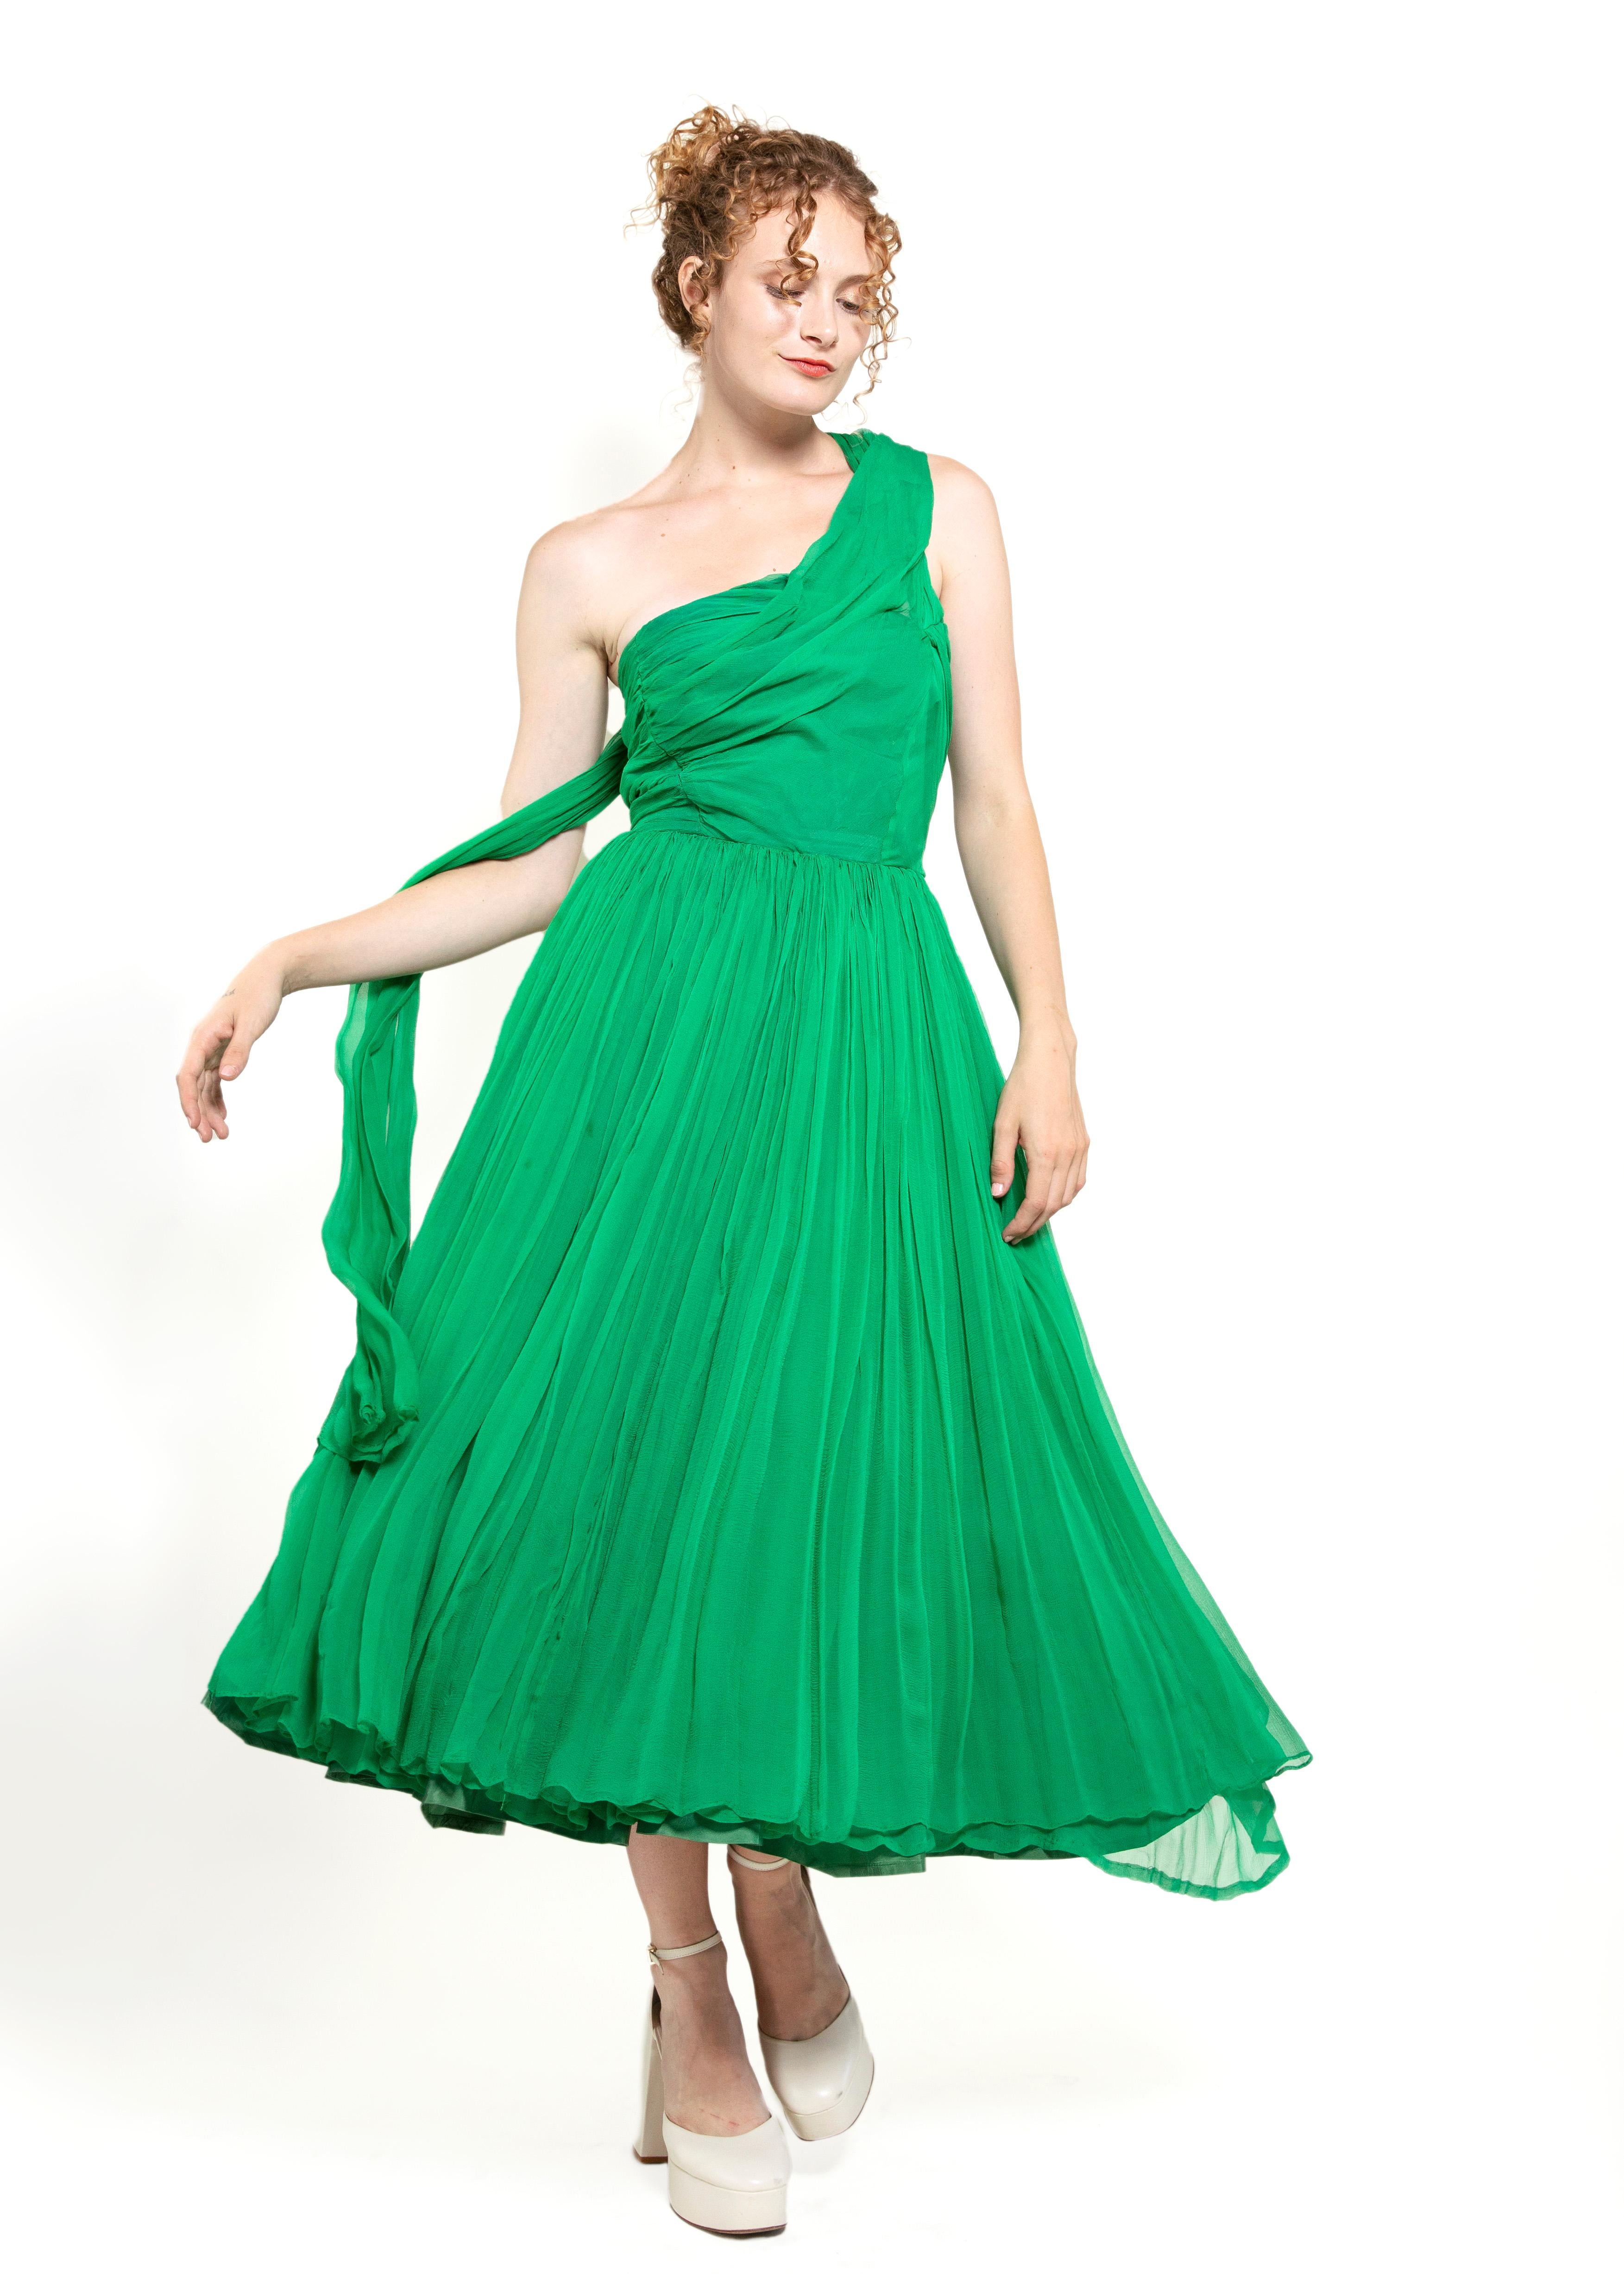 1950's Vintage Kelly Green Silk Chiffon Cocktail Dress For Sale 2